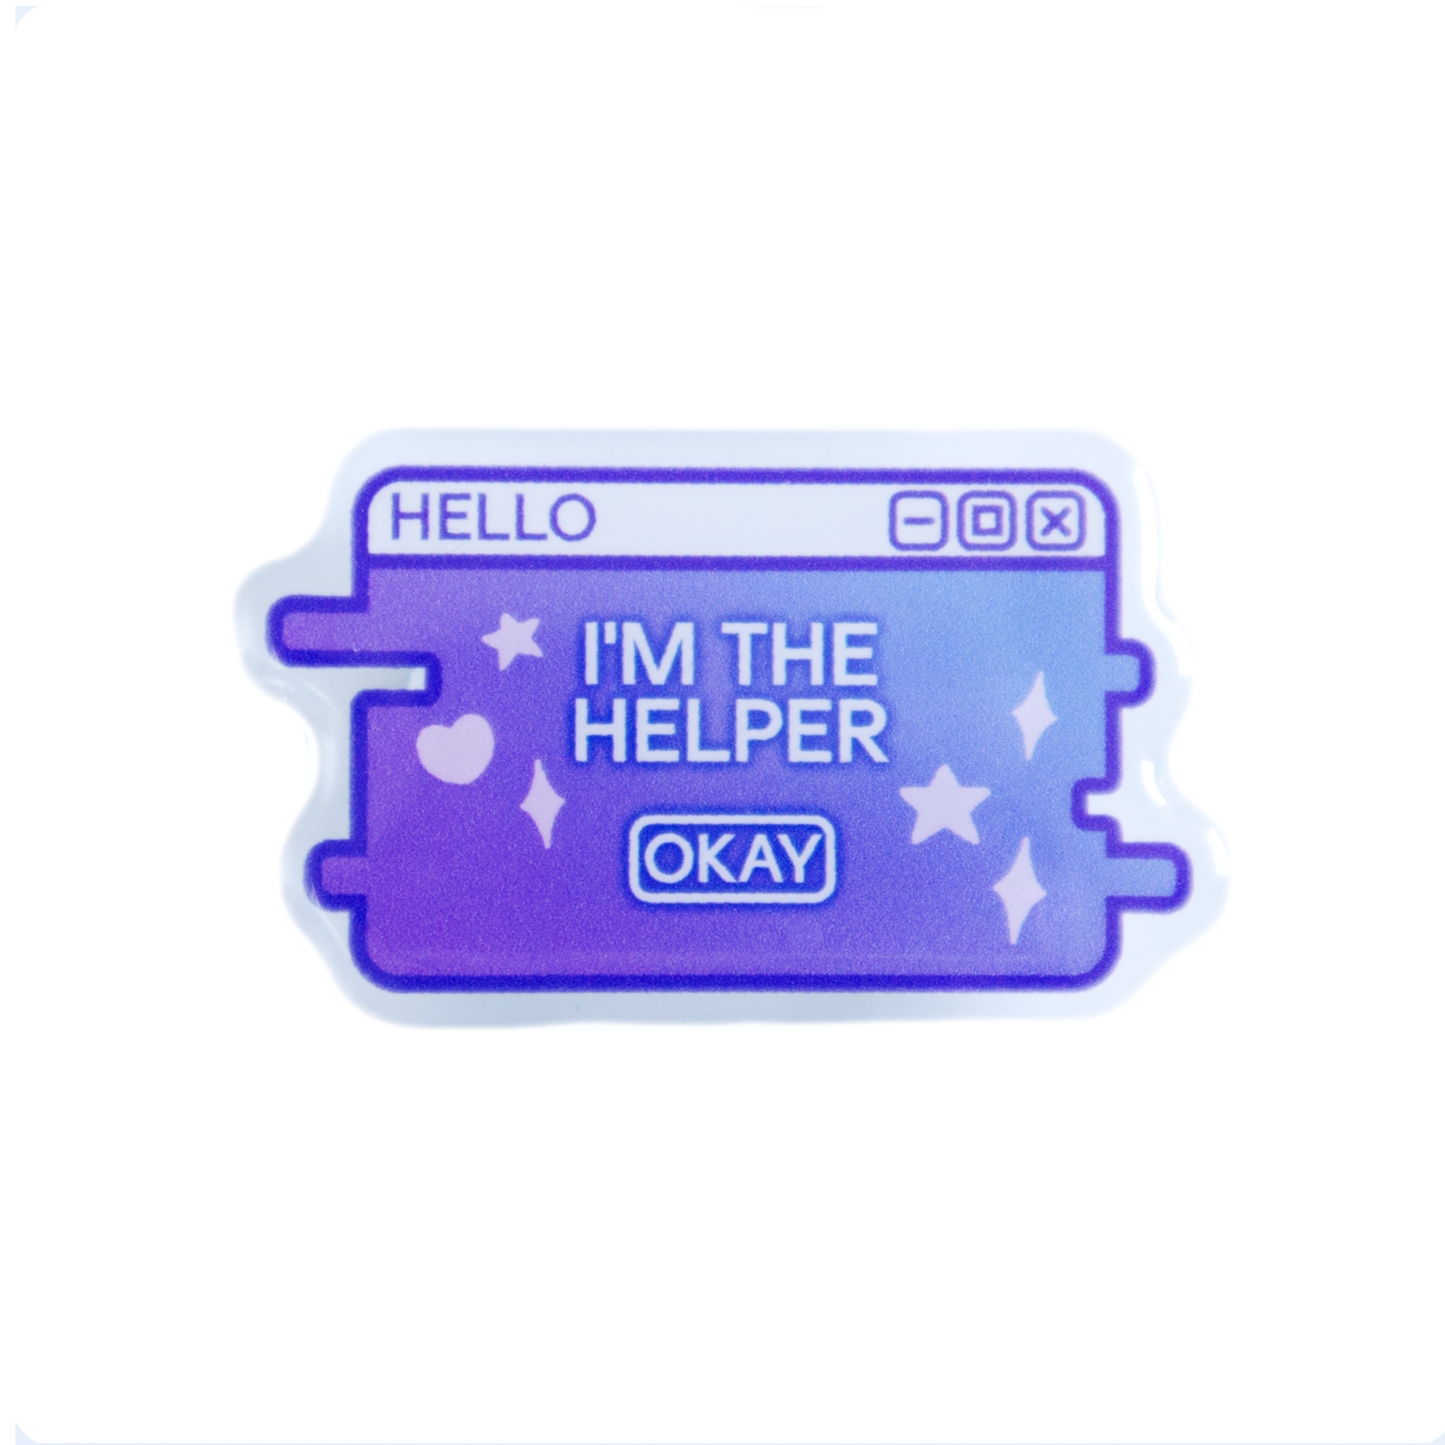 "I'm the Helper" System Message Acrylic Badge